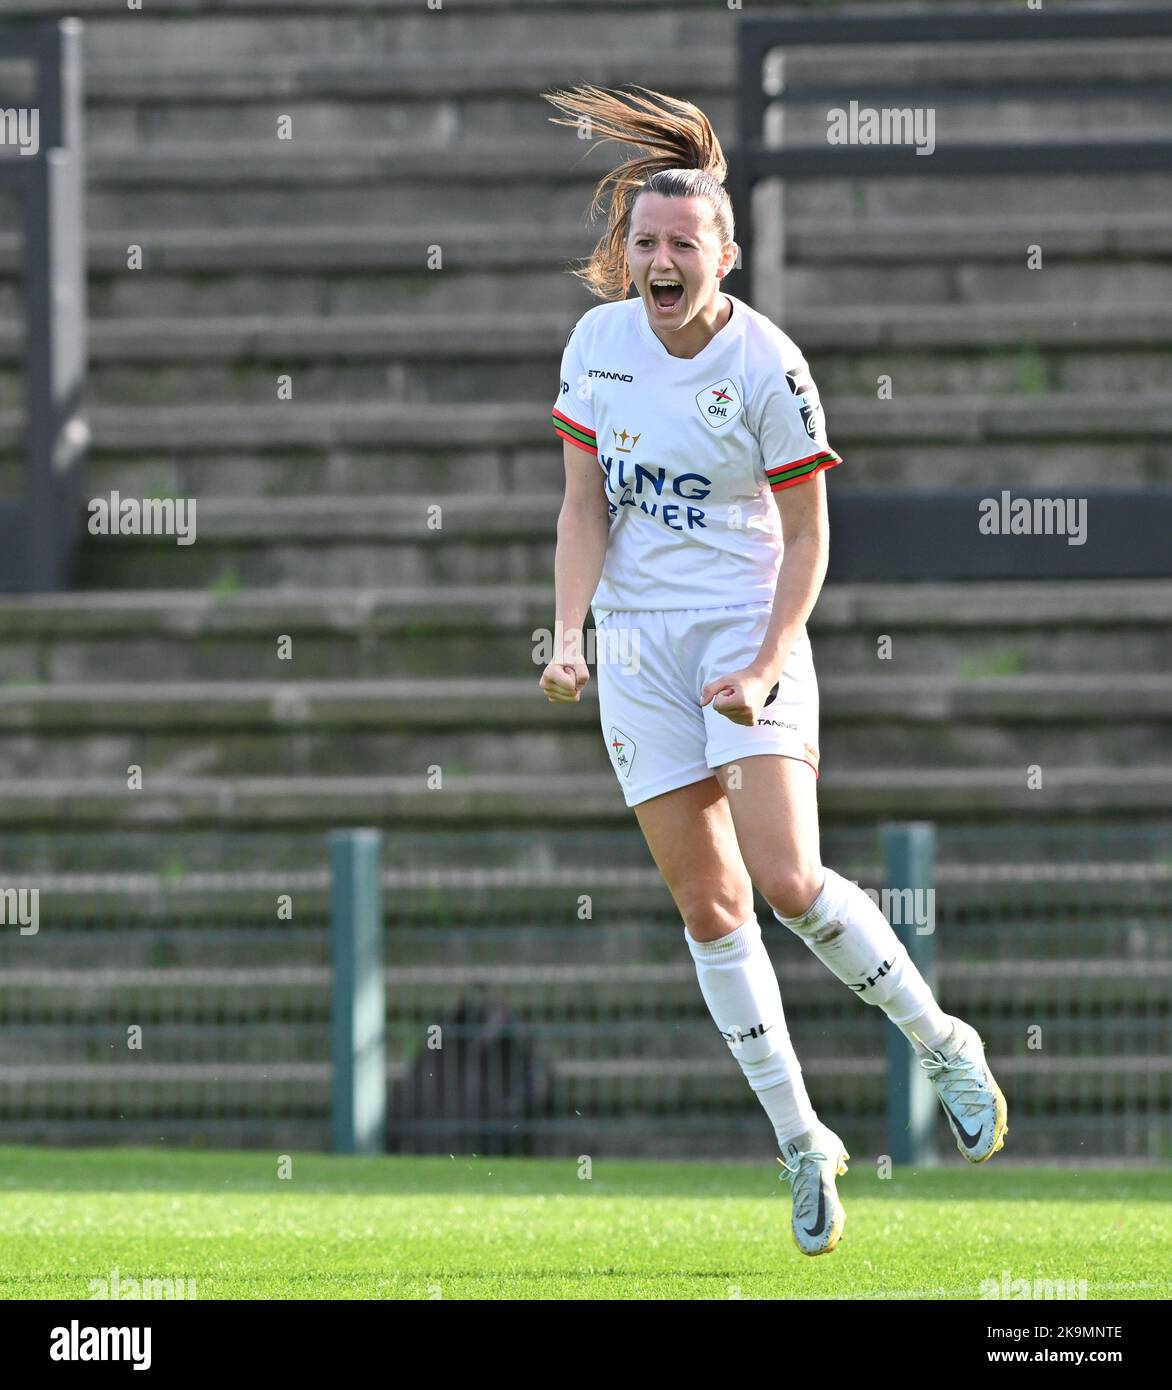 Hannah Eurlings (9) of OHL pictured celebrating after scoring a goal during  a female soccer game between Club Brugge Dames YLA and Oud Heverlee Leuven  on the 9th matchday of the 2022 -